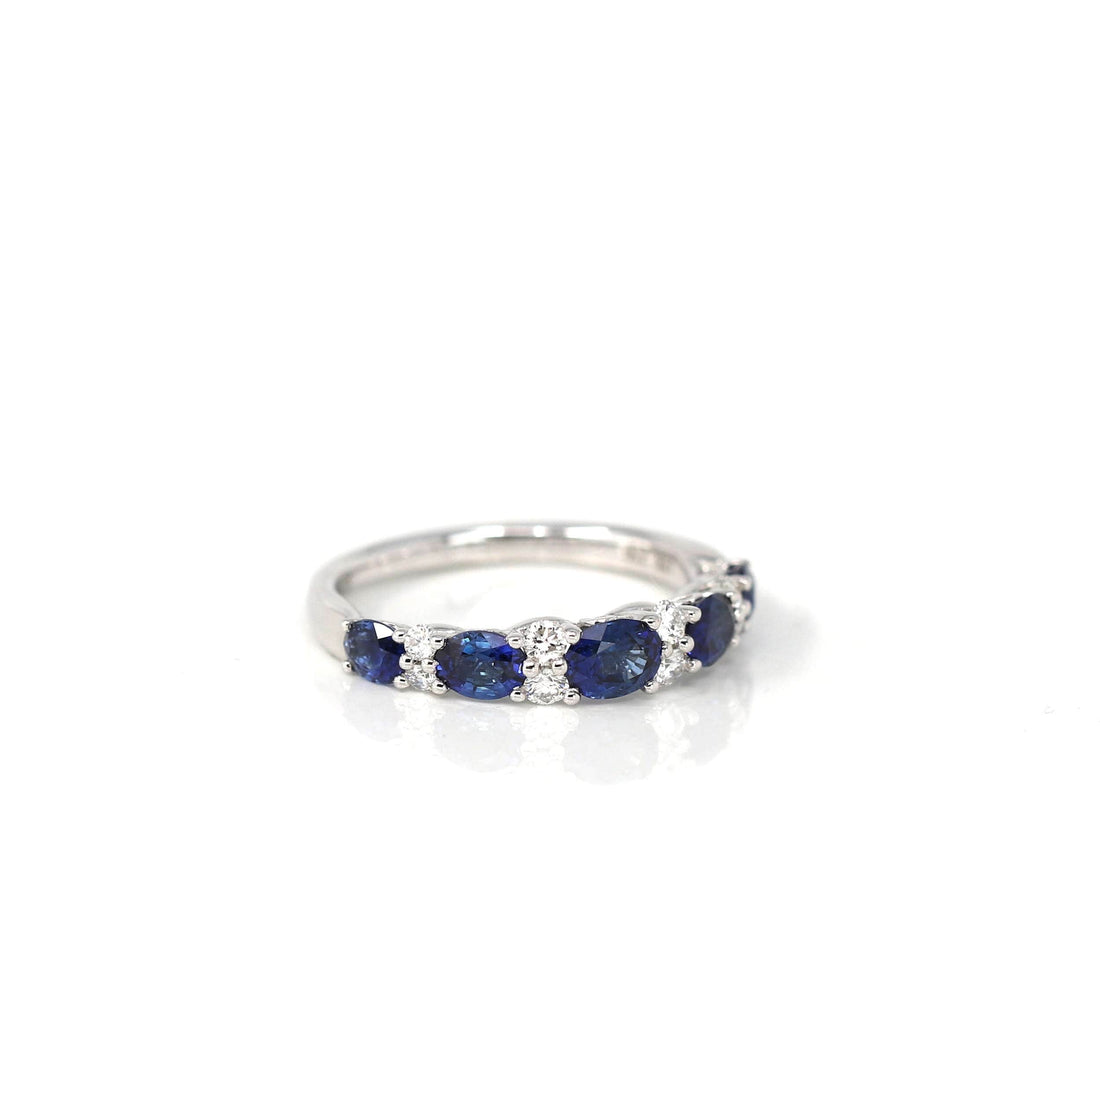 Baikalla Jewelry Gold Sapphire Ring 18k White Gold Natural Blue Sapphire Five Stones Set Band Ring with Diamonds